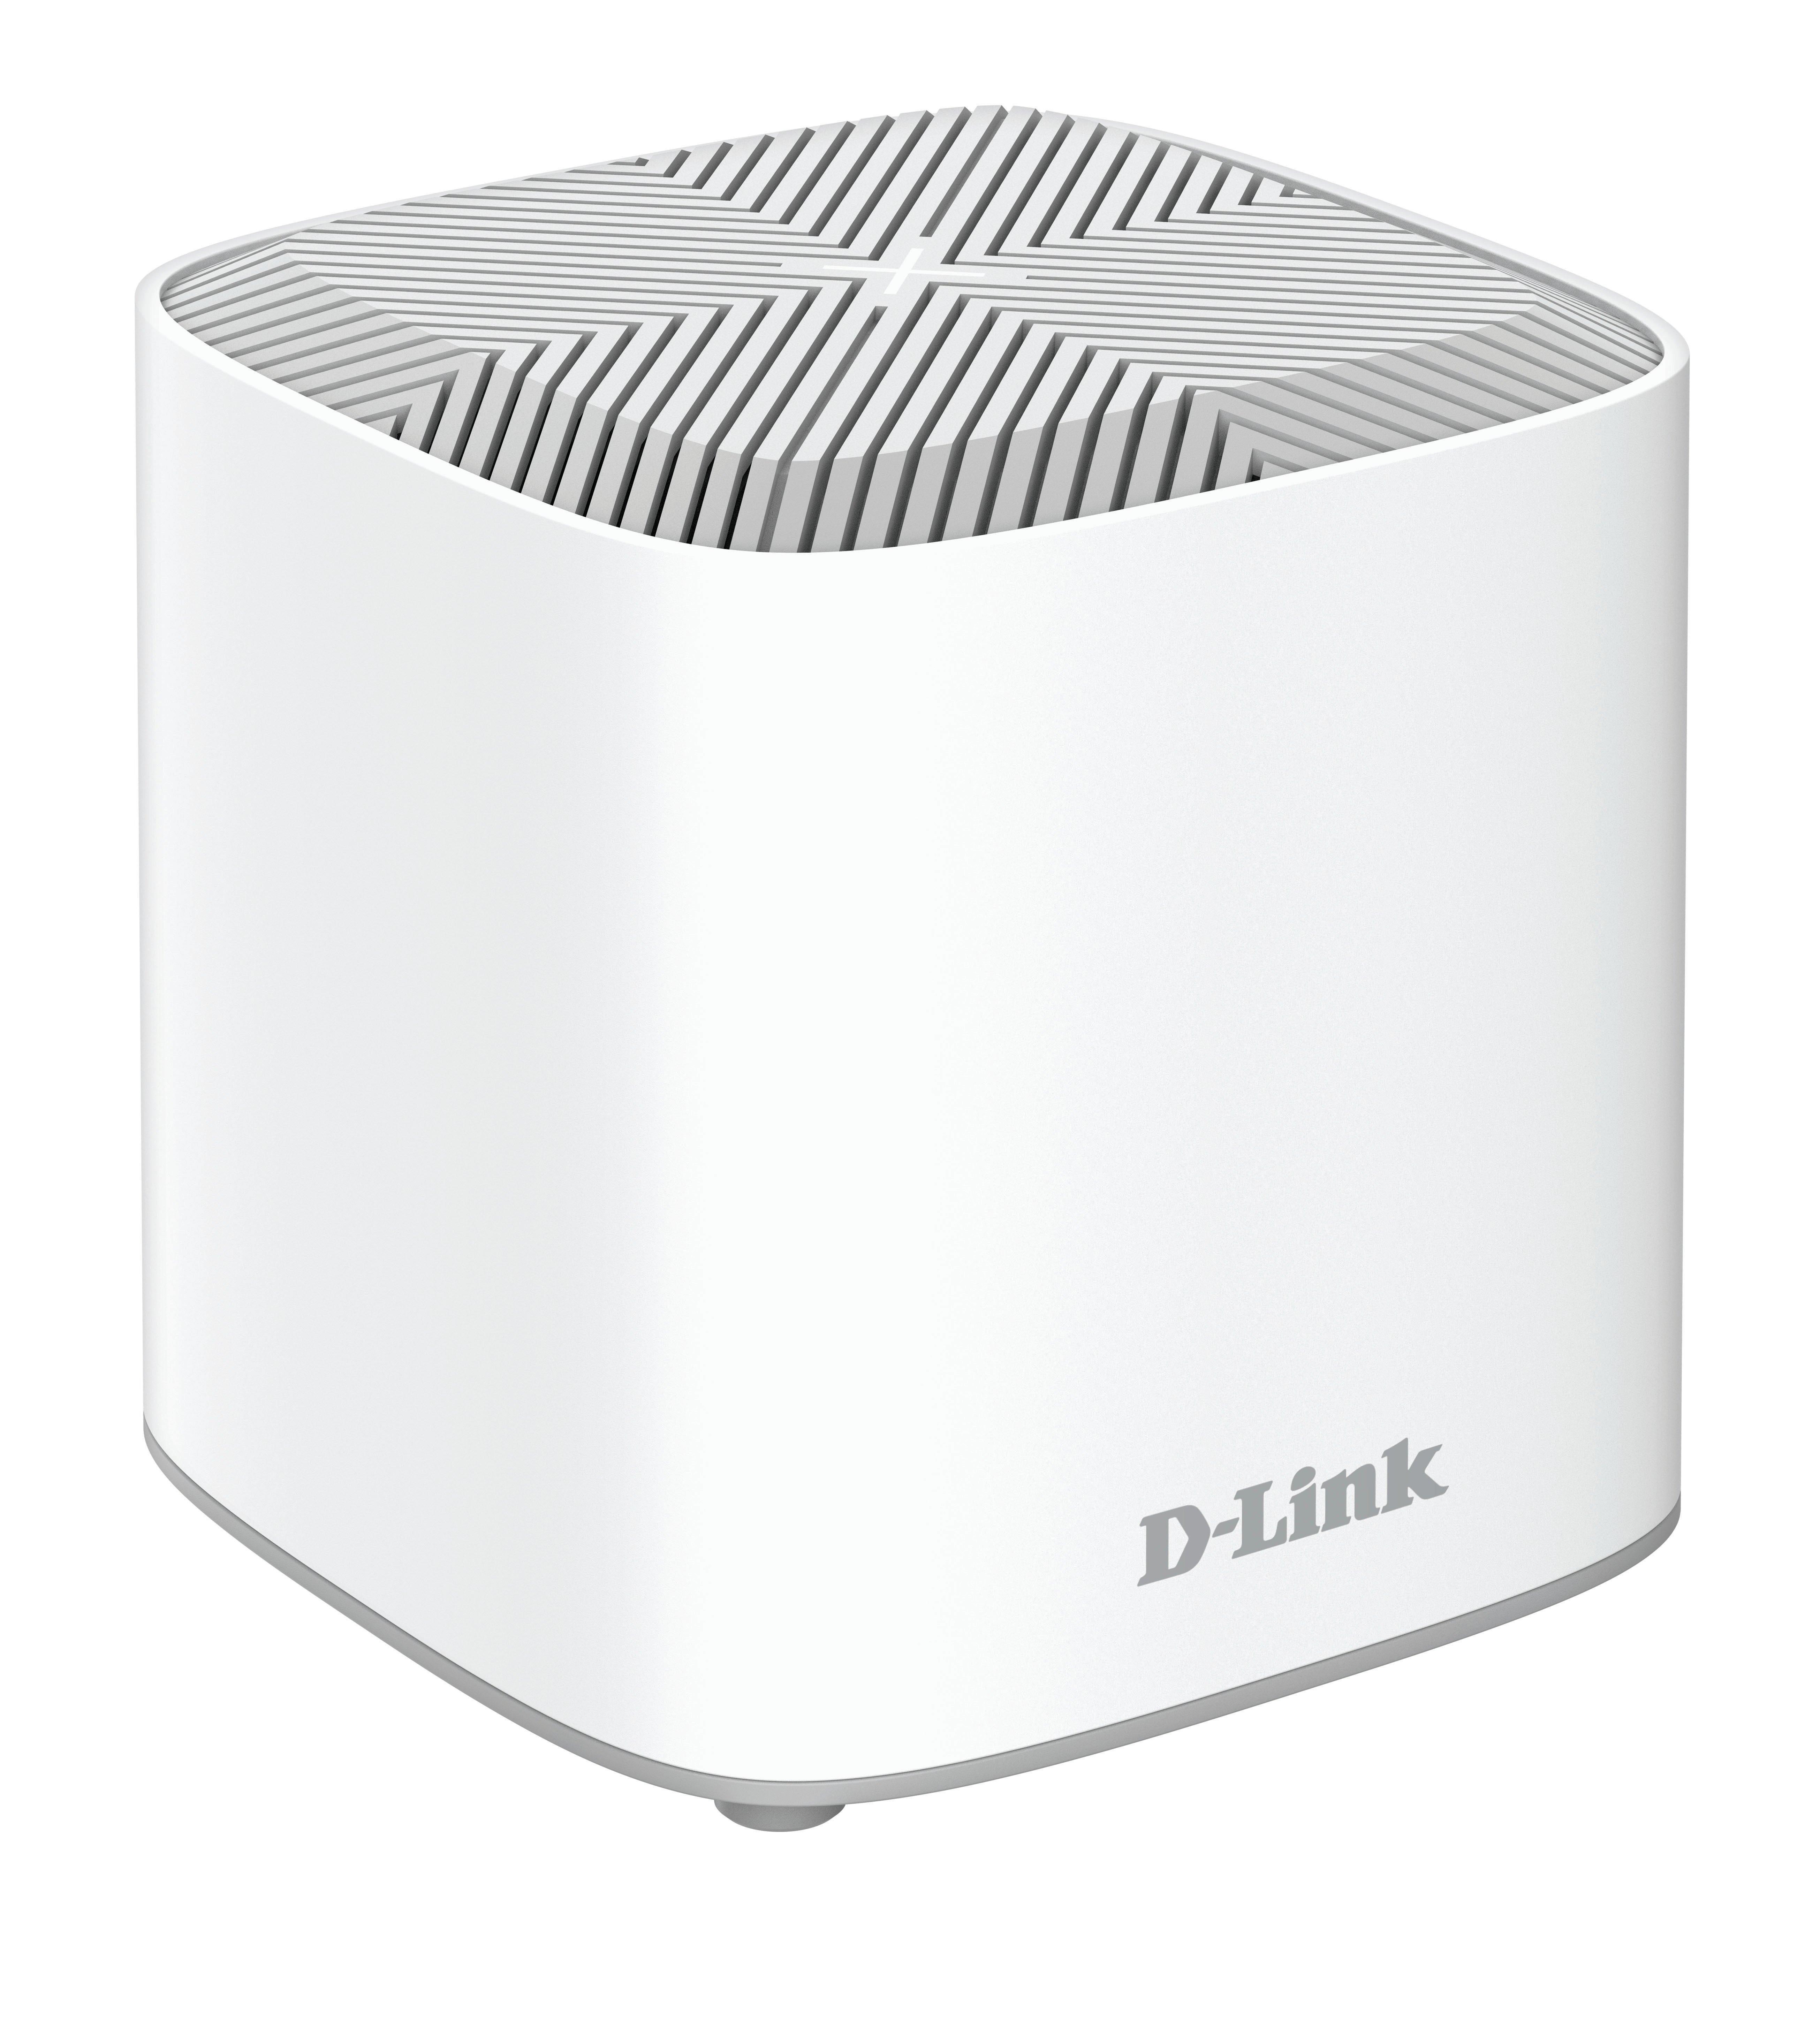 D-Link  COVR-X1863 WLAN Access Point 1800 Mbit/s Weiß Power over Ethernet (PoE) 